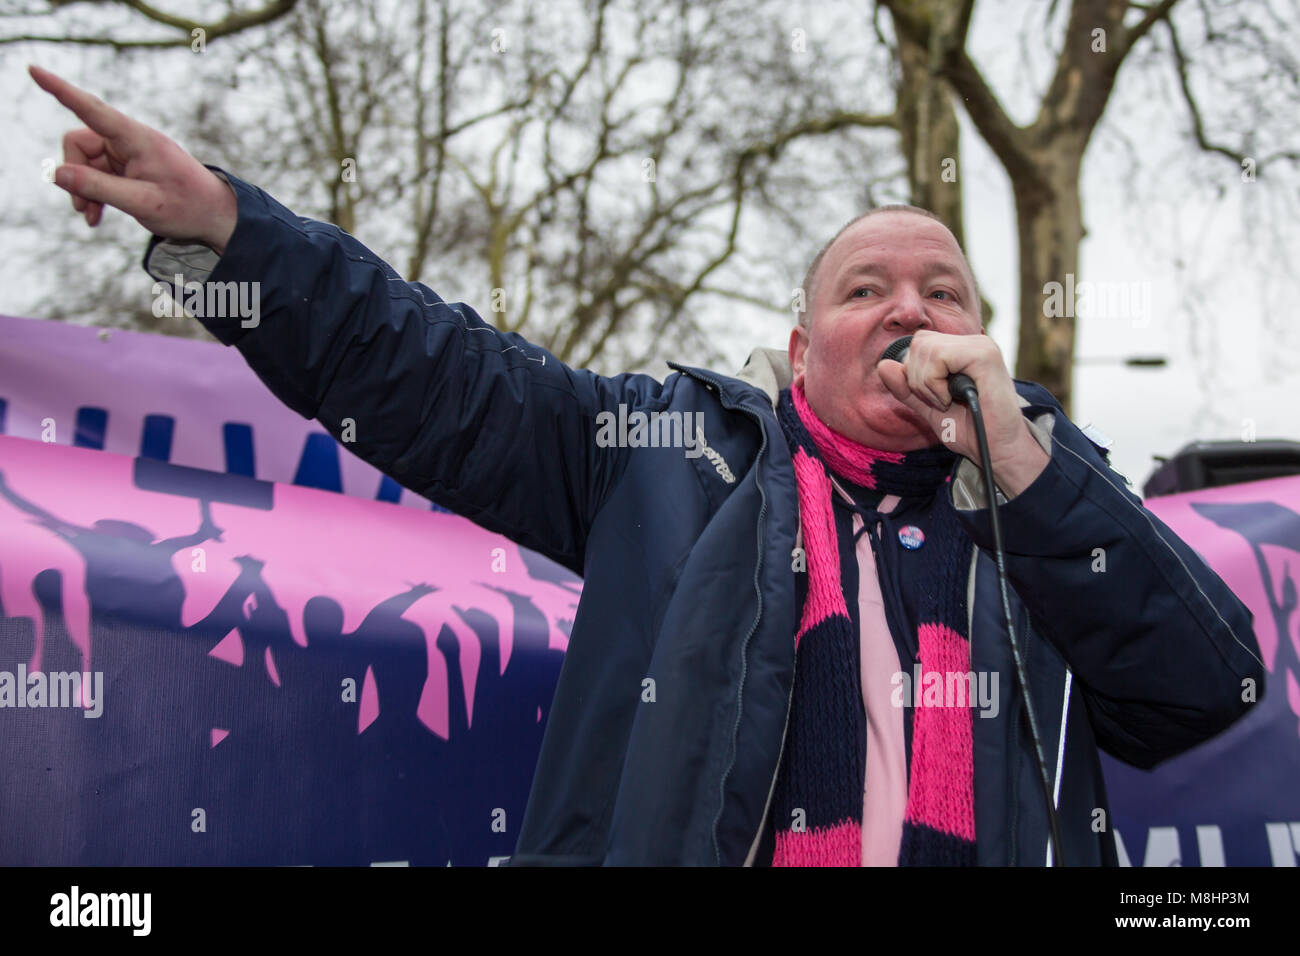 London, UK. 17 March 2018. Supporters of Non-league Football Club, Dulwich Hamlet rallied and marched to save the club from eviction from their Champion hill home by property developers Meadow Residential. David Rowe/ Alamy Live News. Stock Photo